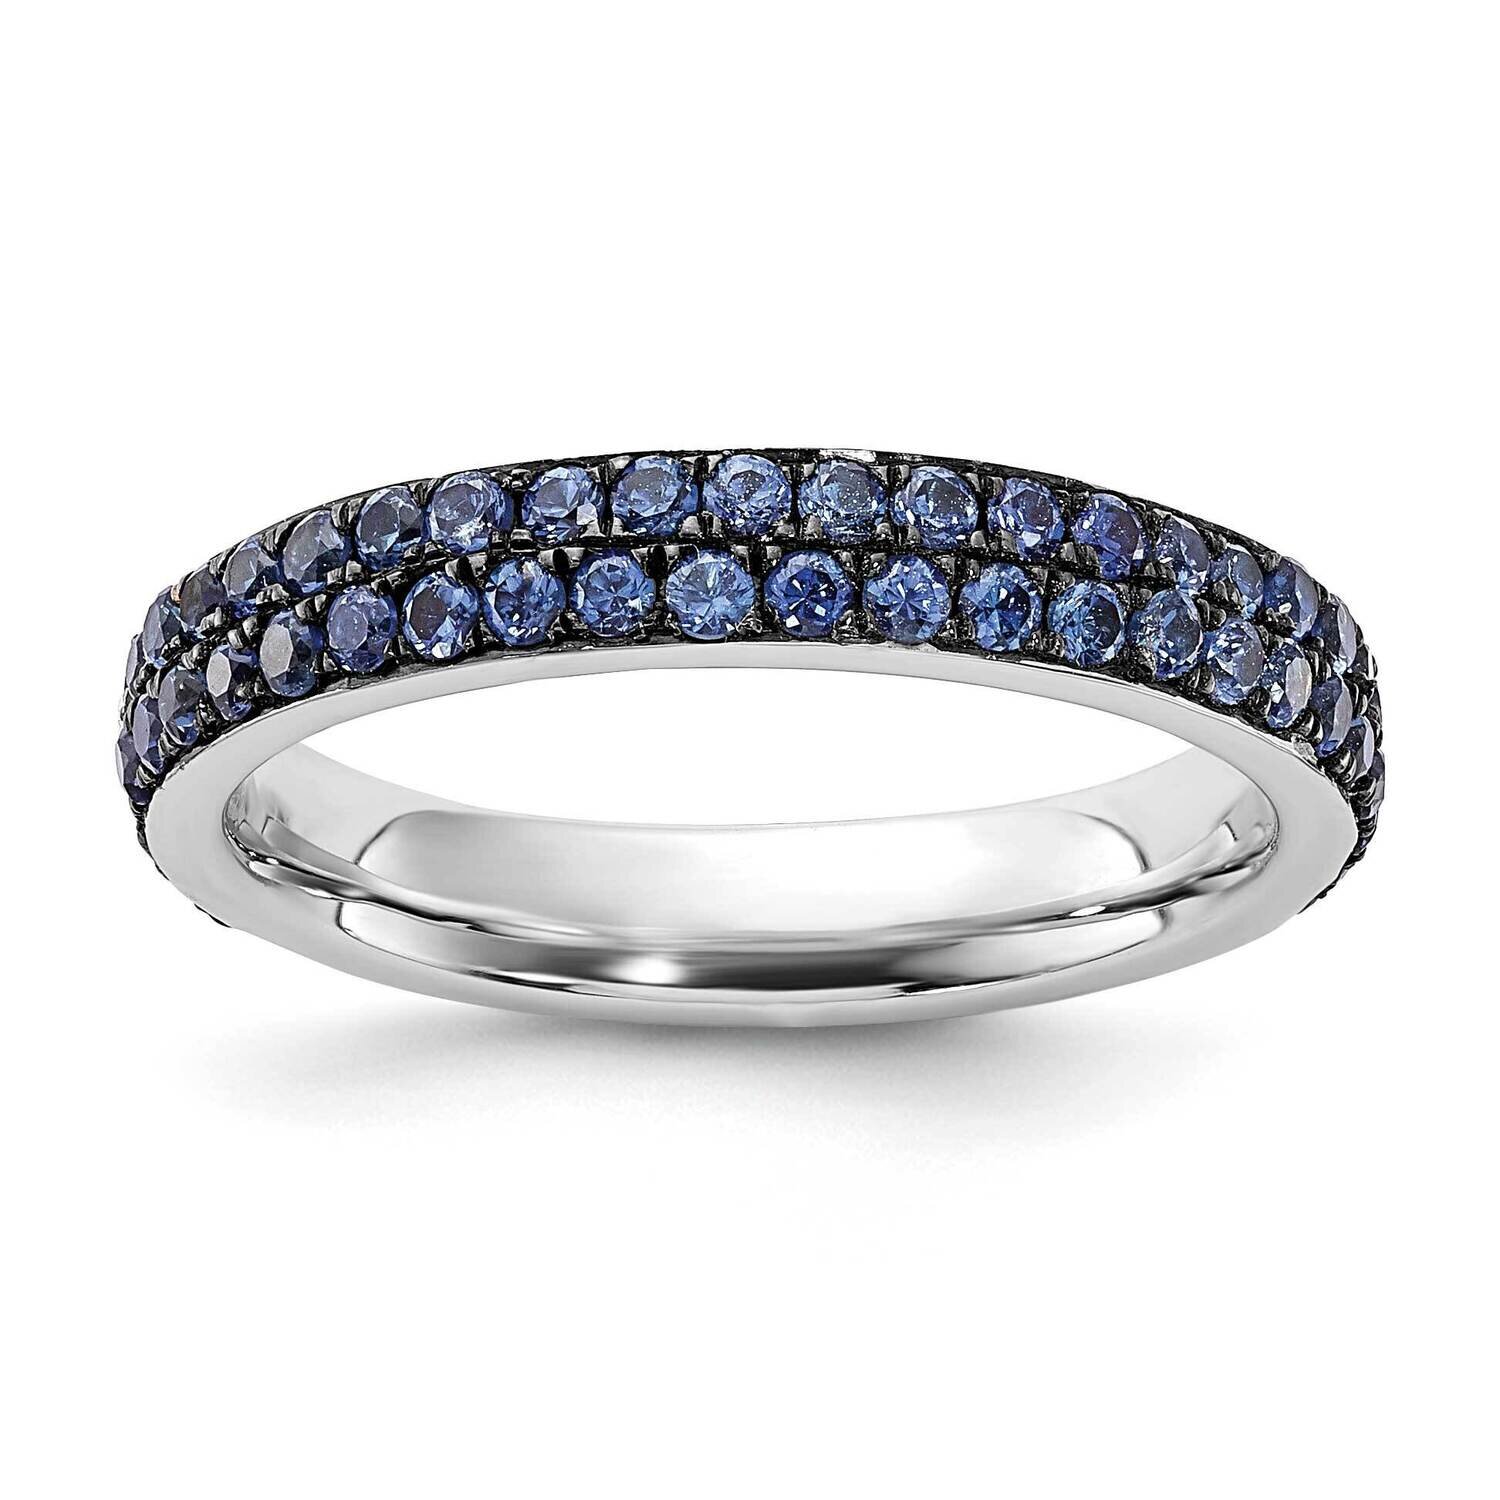 Sterling Silver Stackable Expressions Polished Created Sapphire Ring QSK664-10